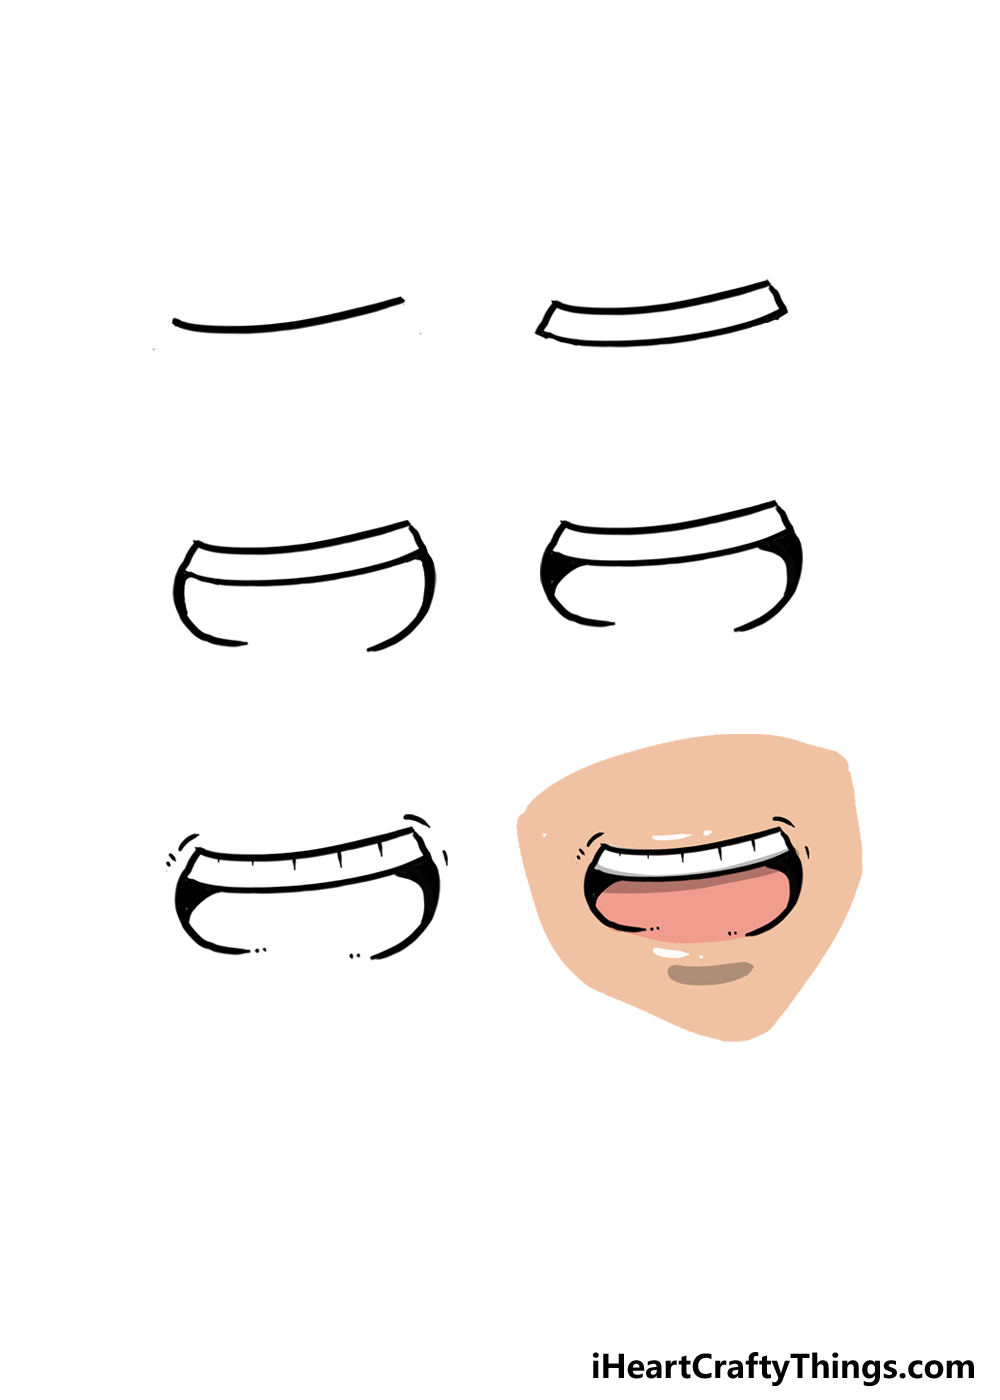 How to Draw An Anime Mouth